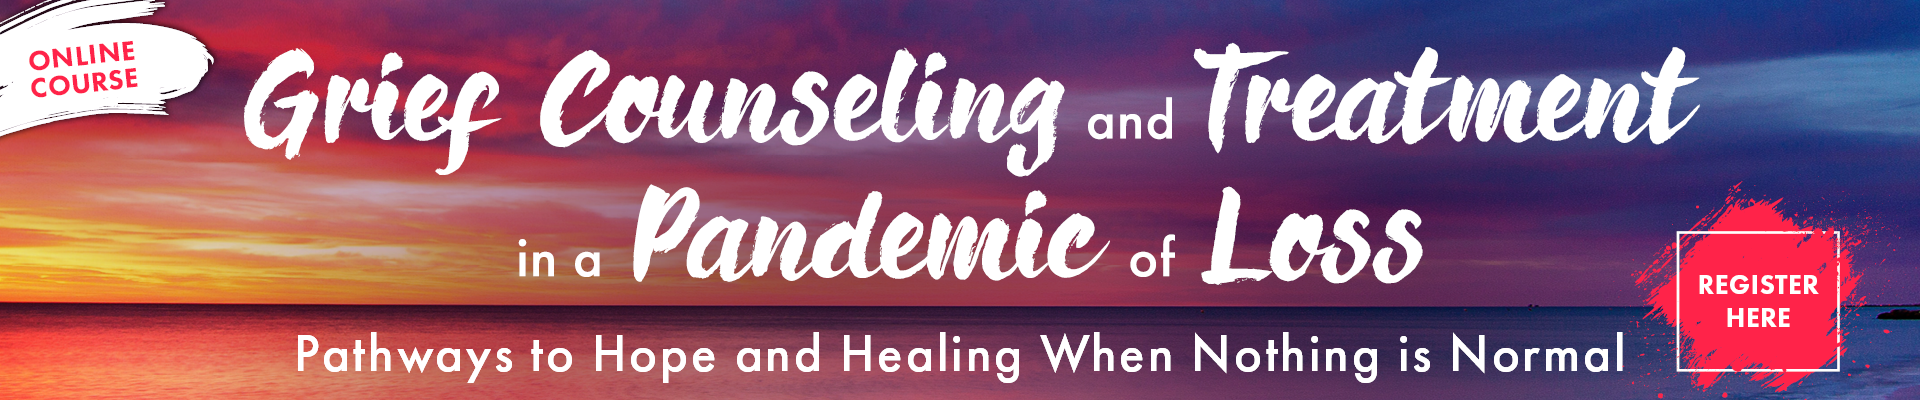 Grief Counseling and Treatment in a Pandemic of Loss: Pathways to Hope and Healing When Nothing is Normal